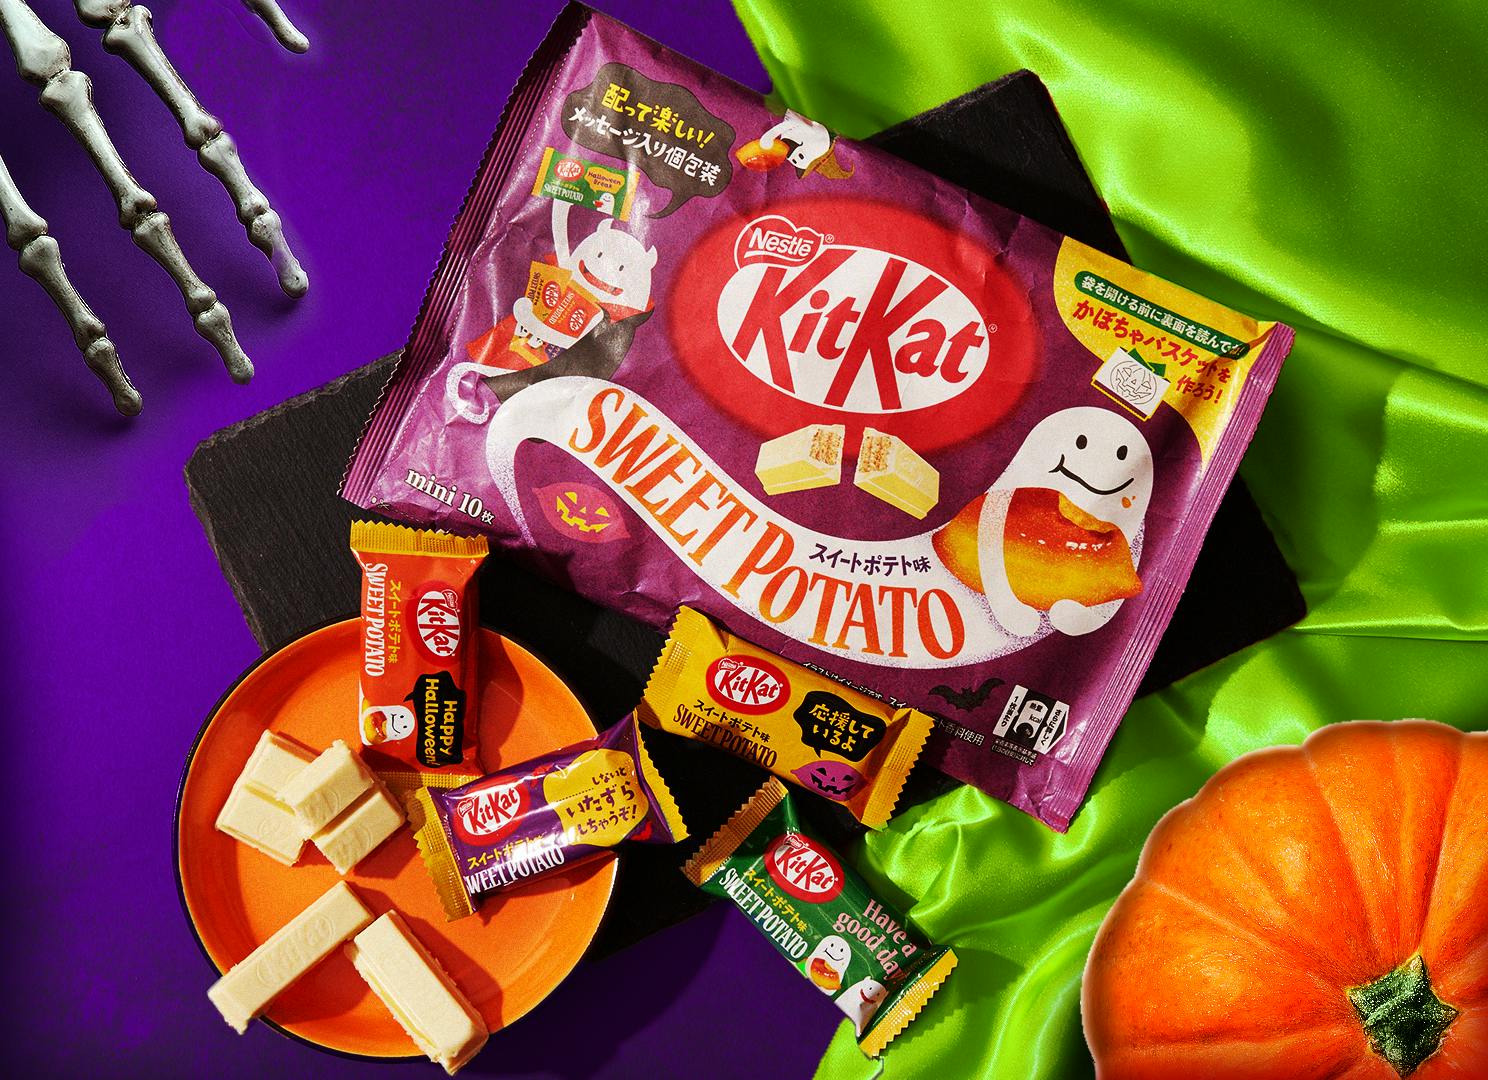 The KitKat Sweet Potato item sits on a backdrop of purple and electric green fabric, surrounded by Halloween motifs.